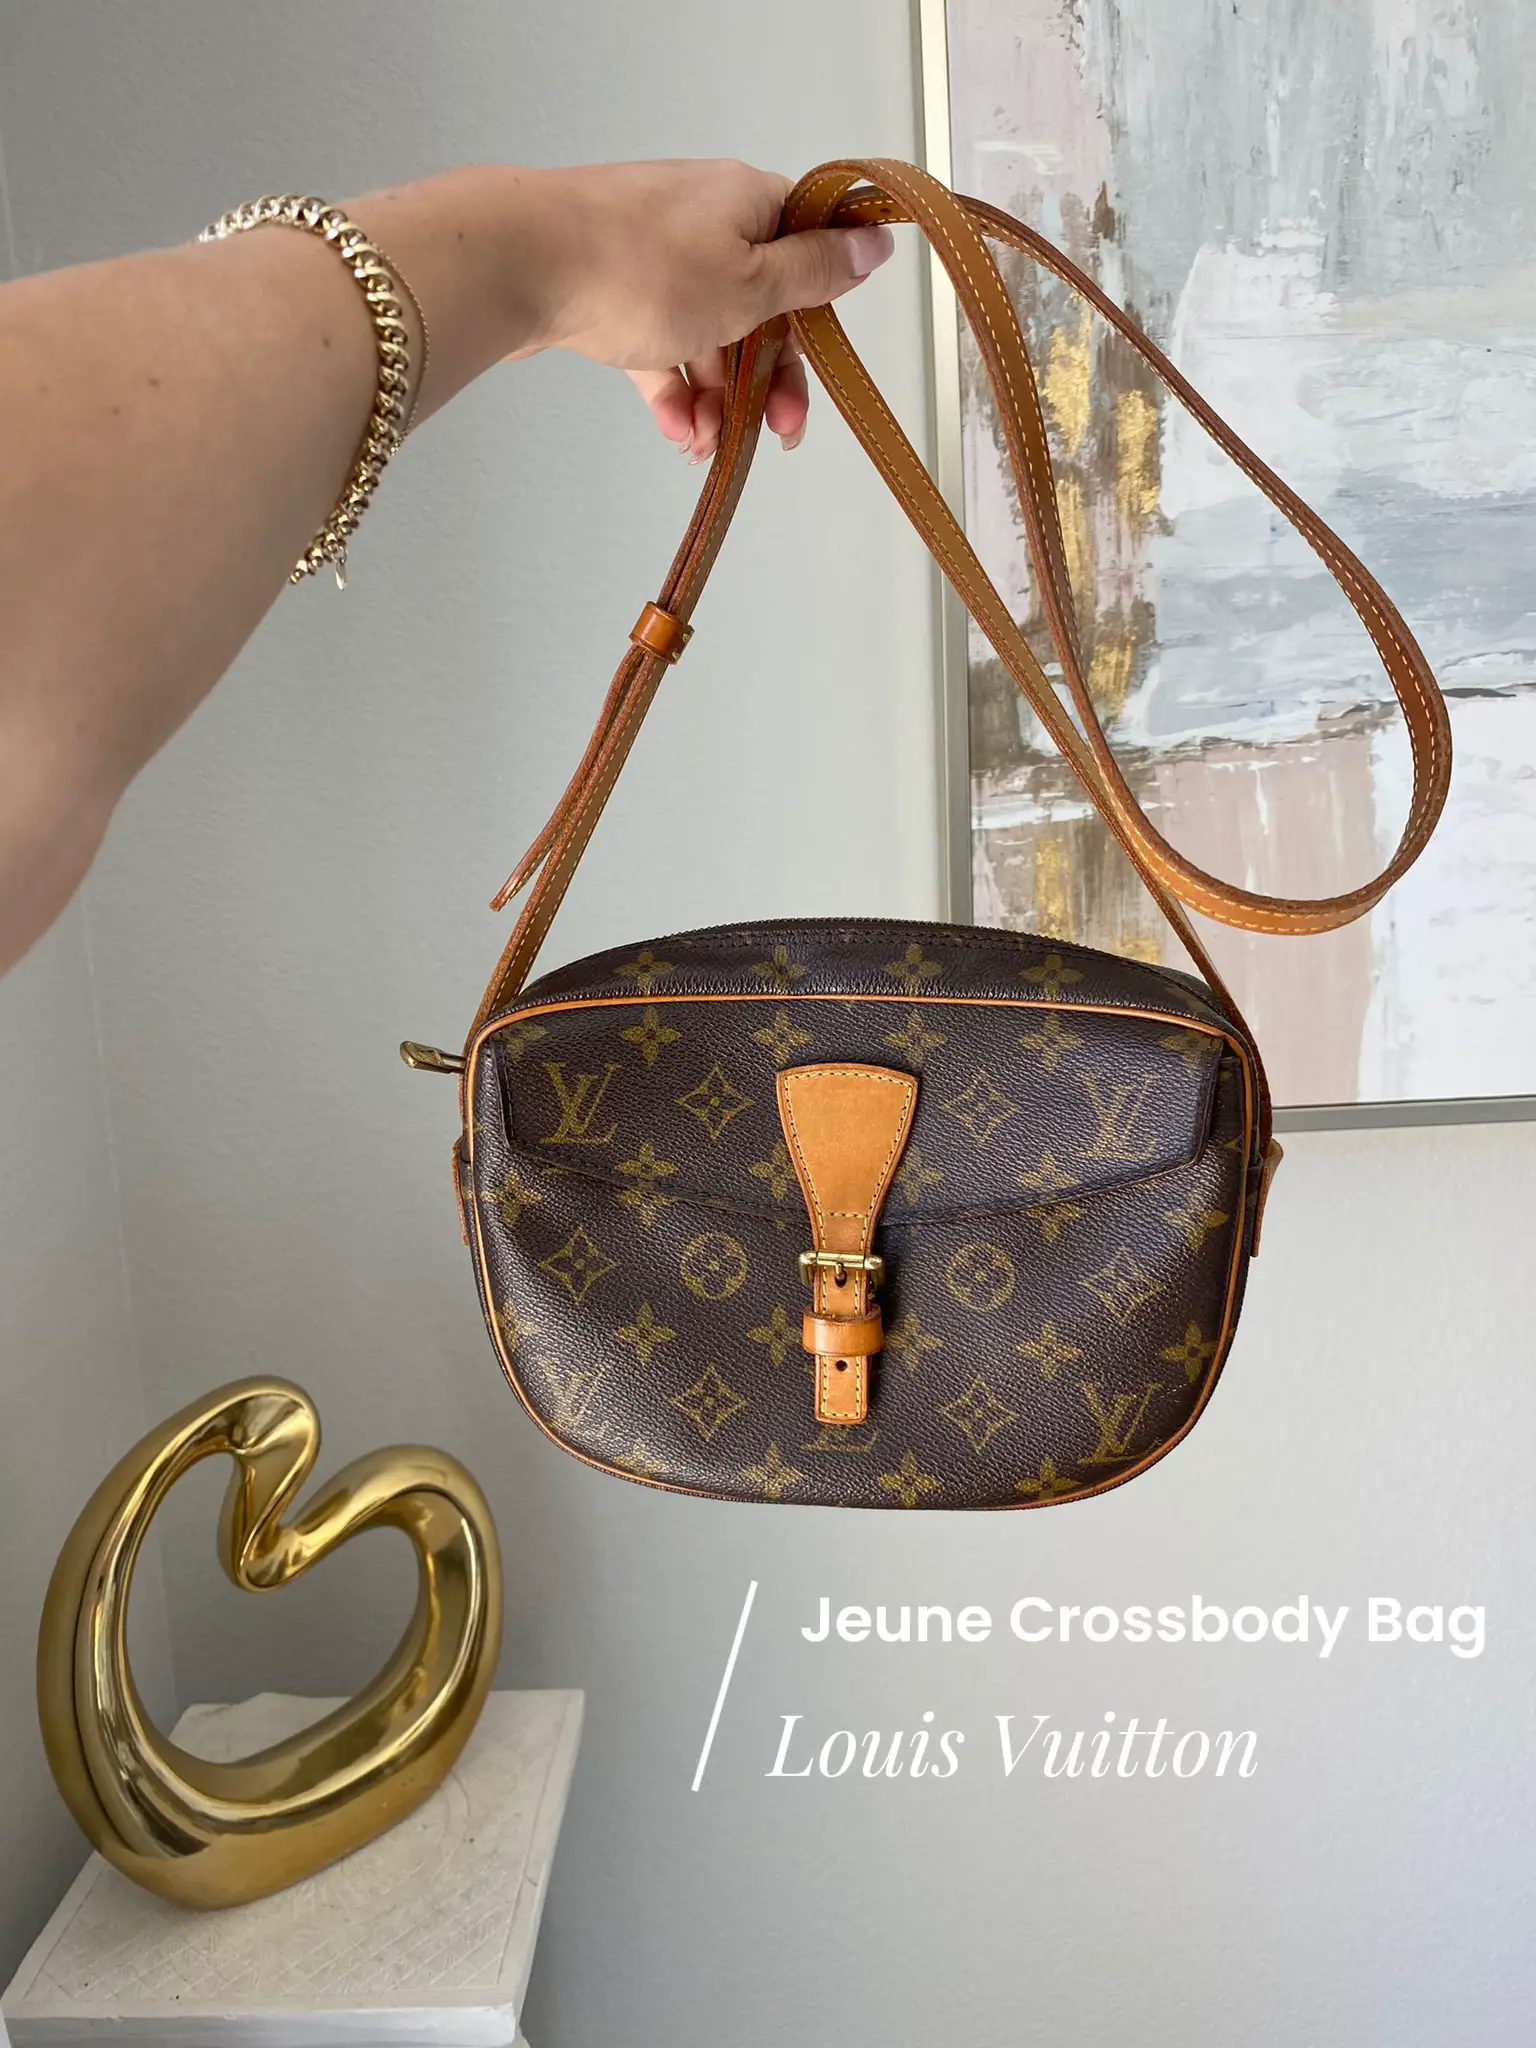 My Louis Vuitton Bag Collection  Gallery posted by Caitlin Eliza